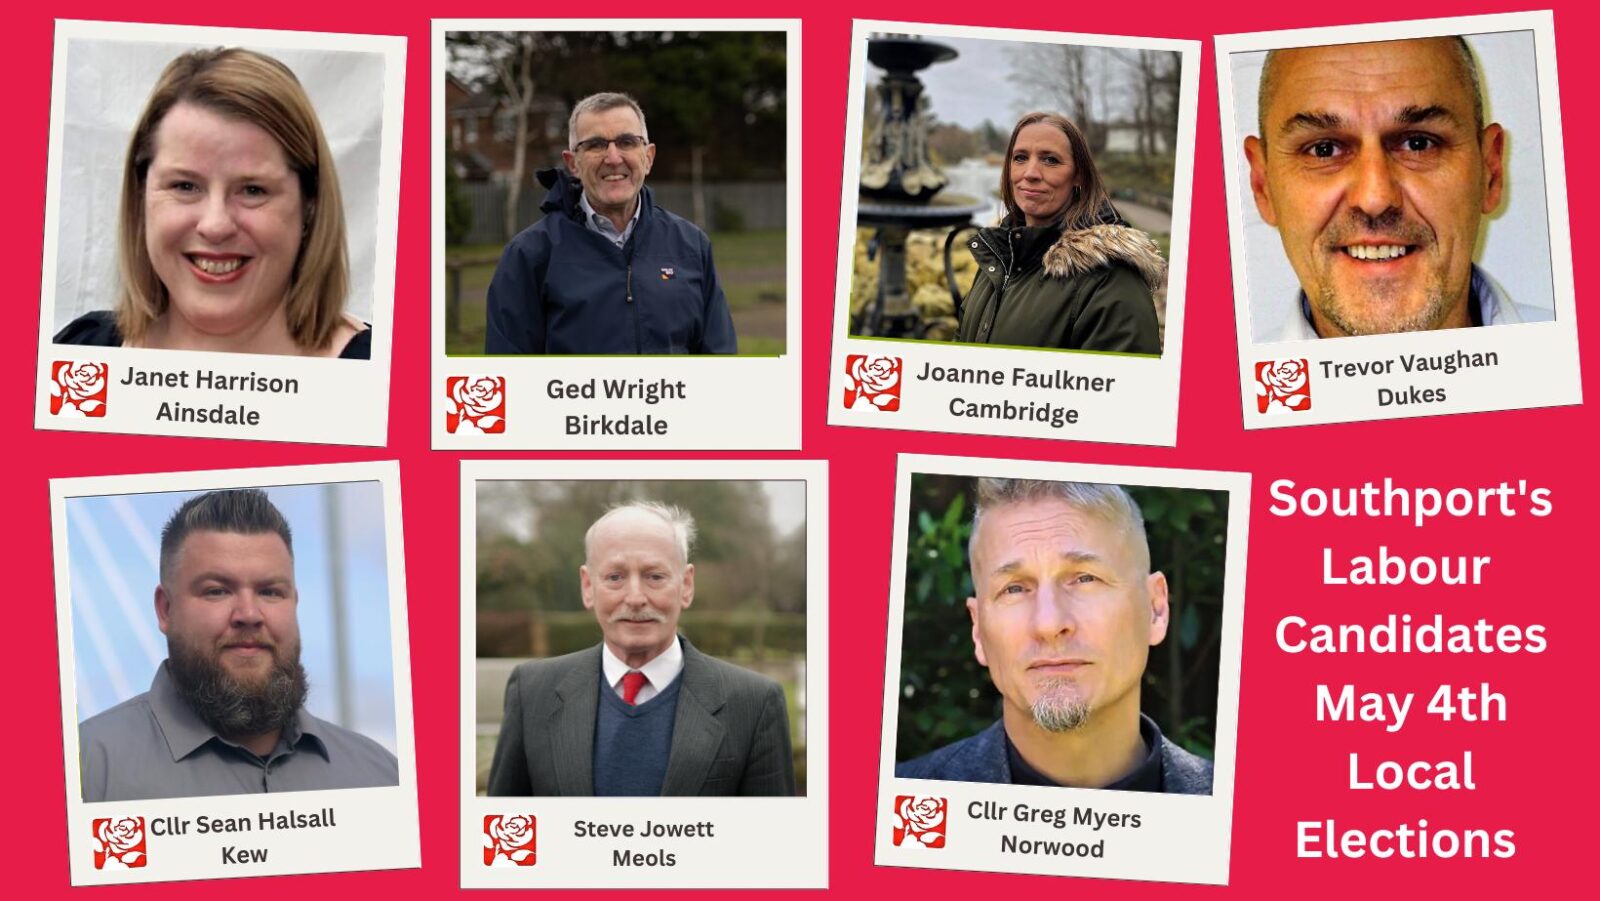 A montage of pictures of Labour